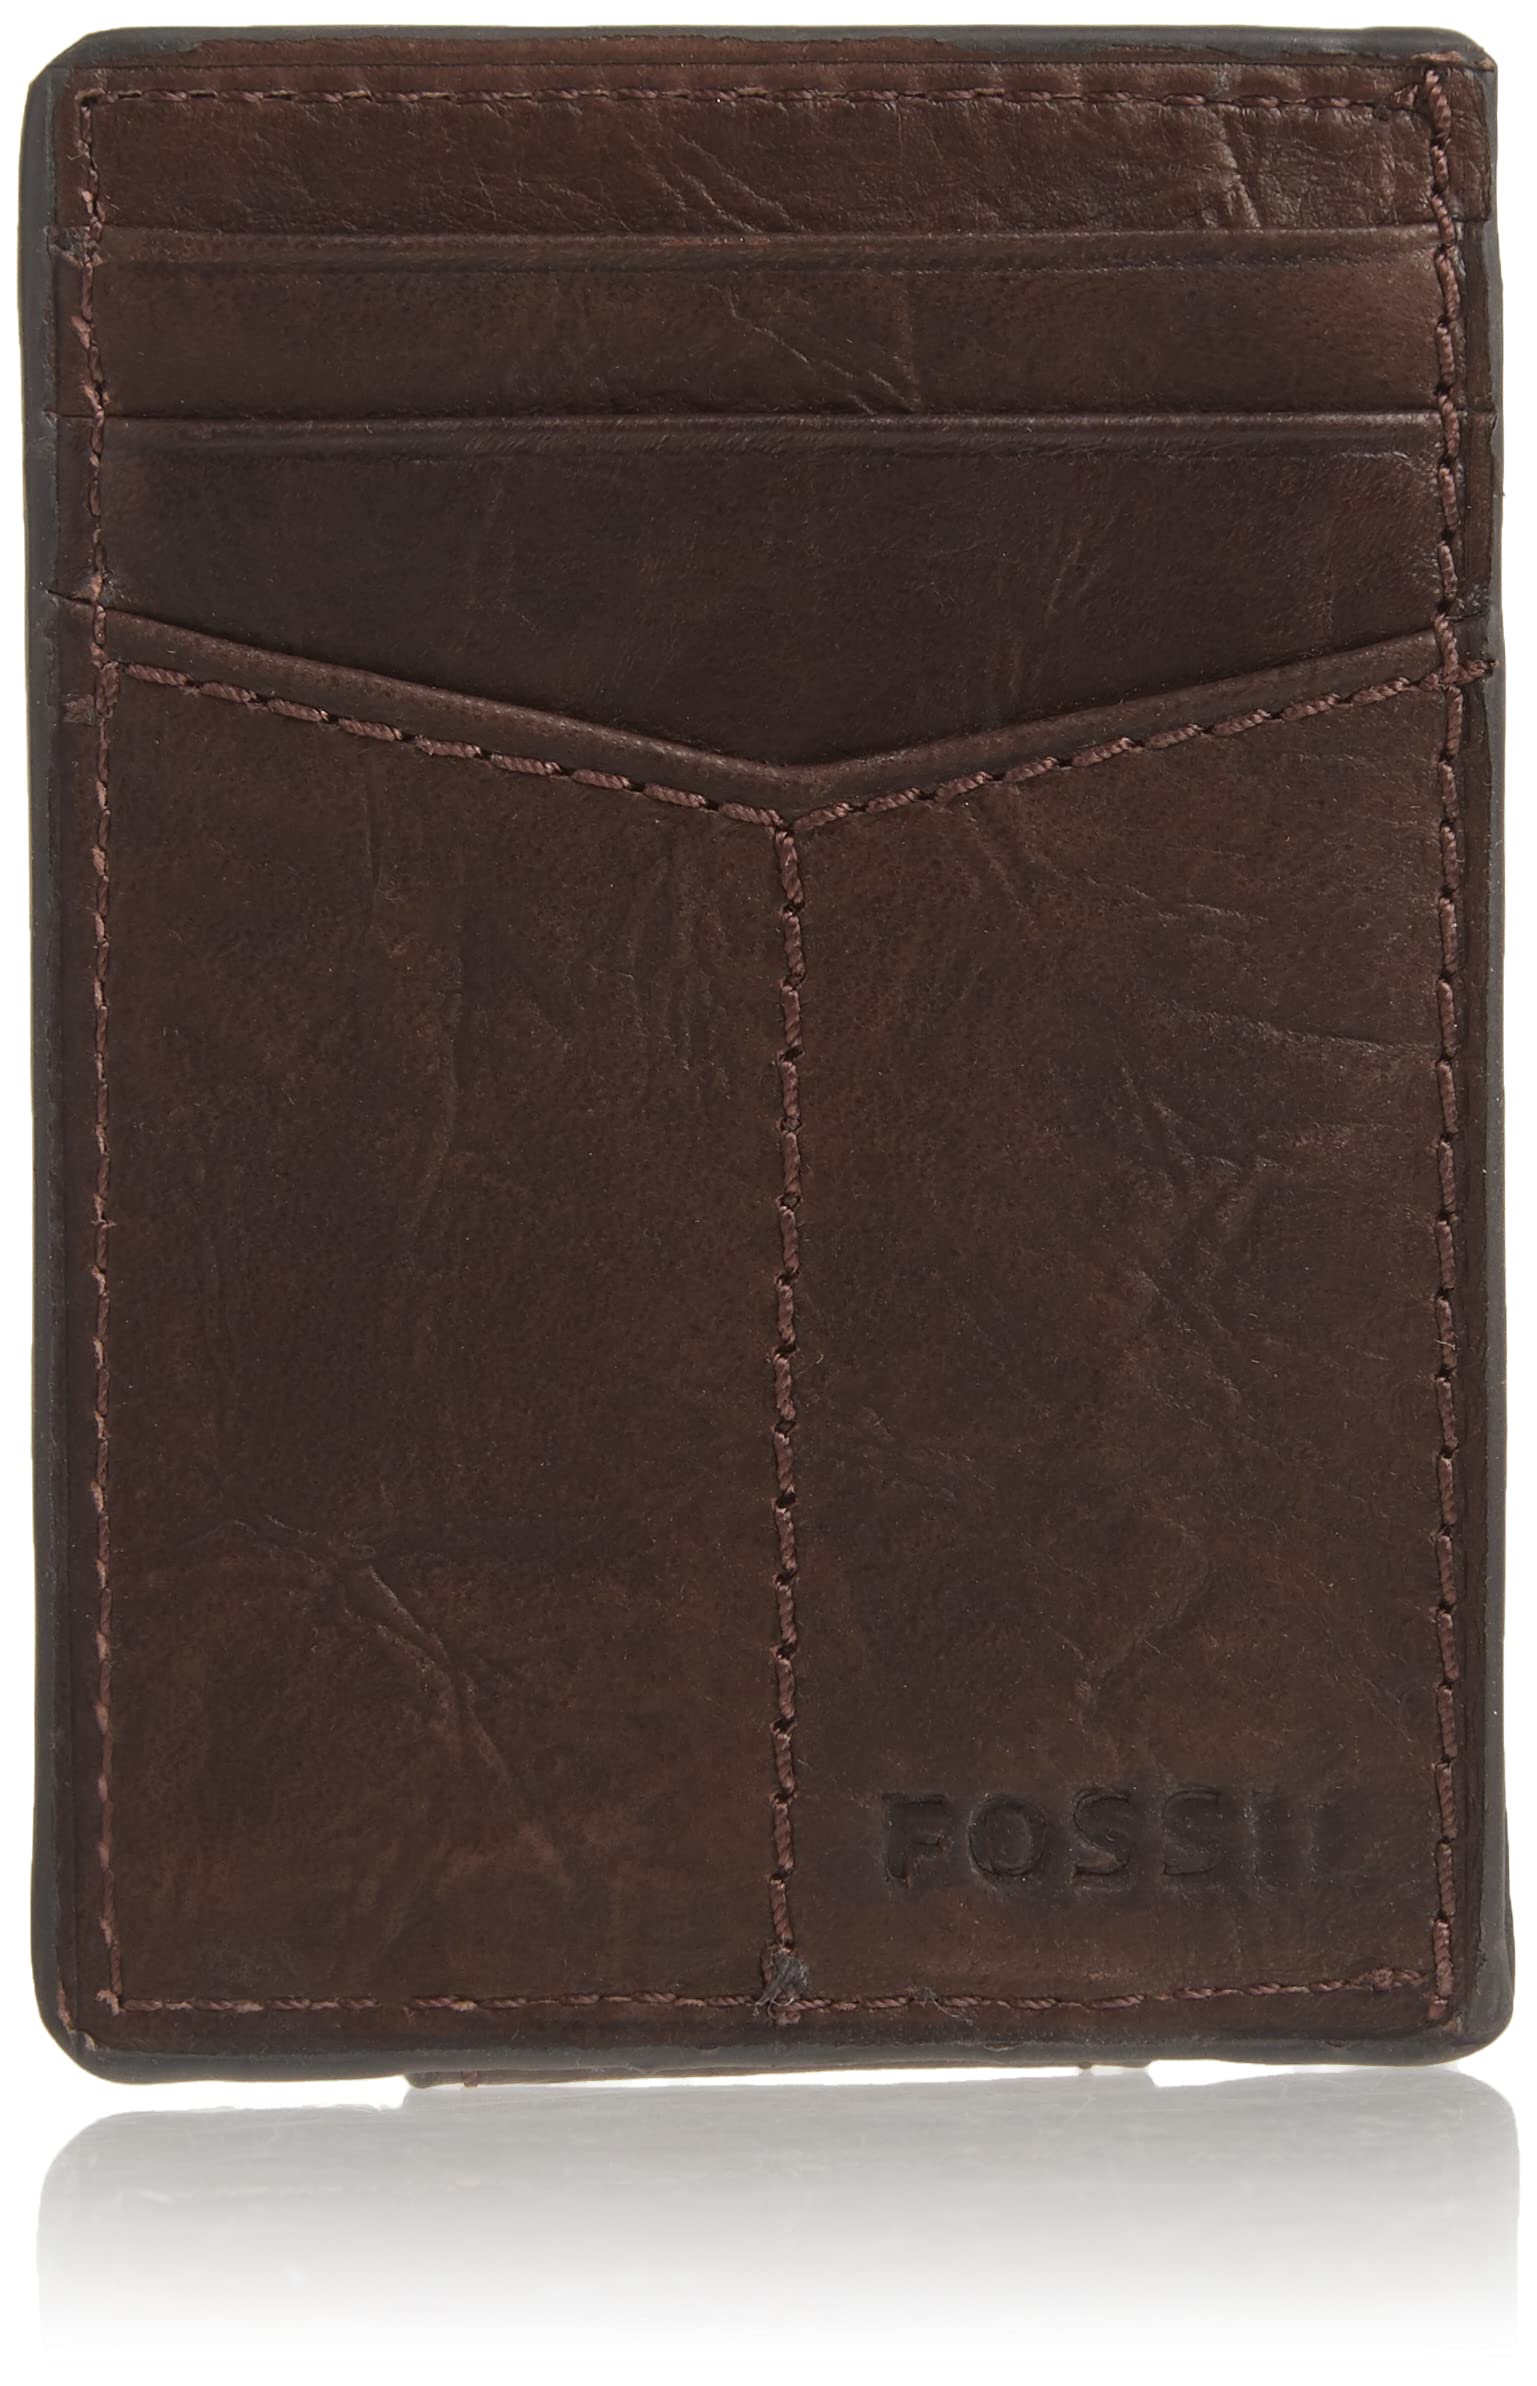 Fossil Men's Neel Leather Magnetic Card Case - Brown